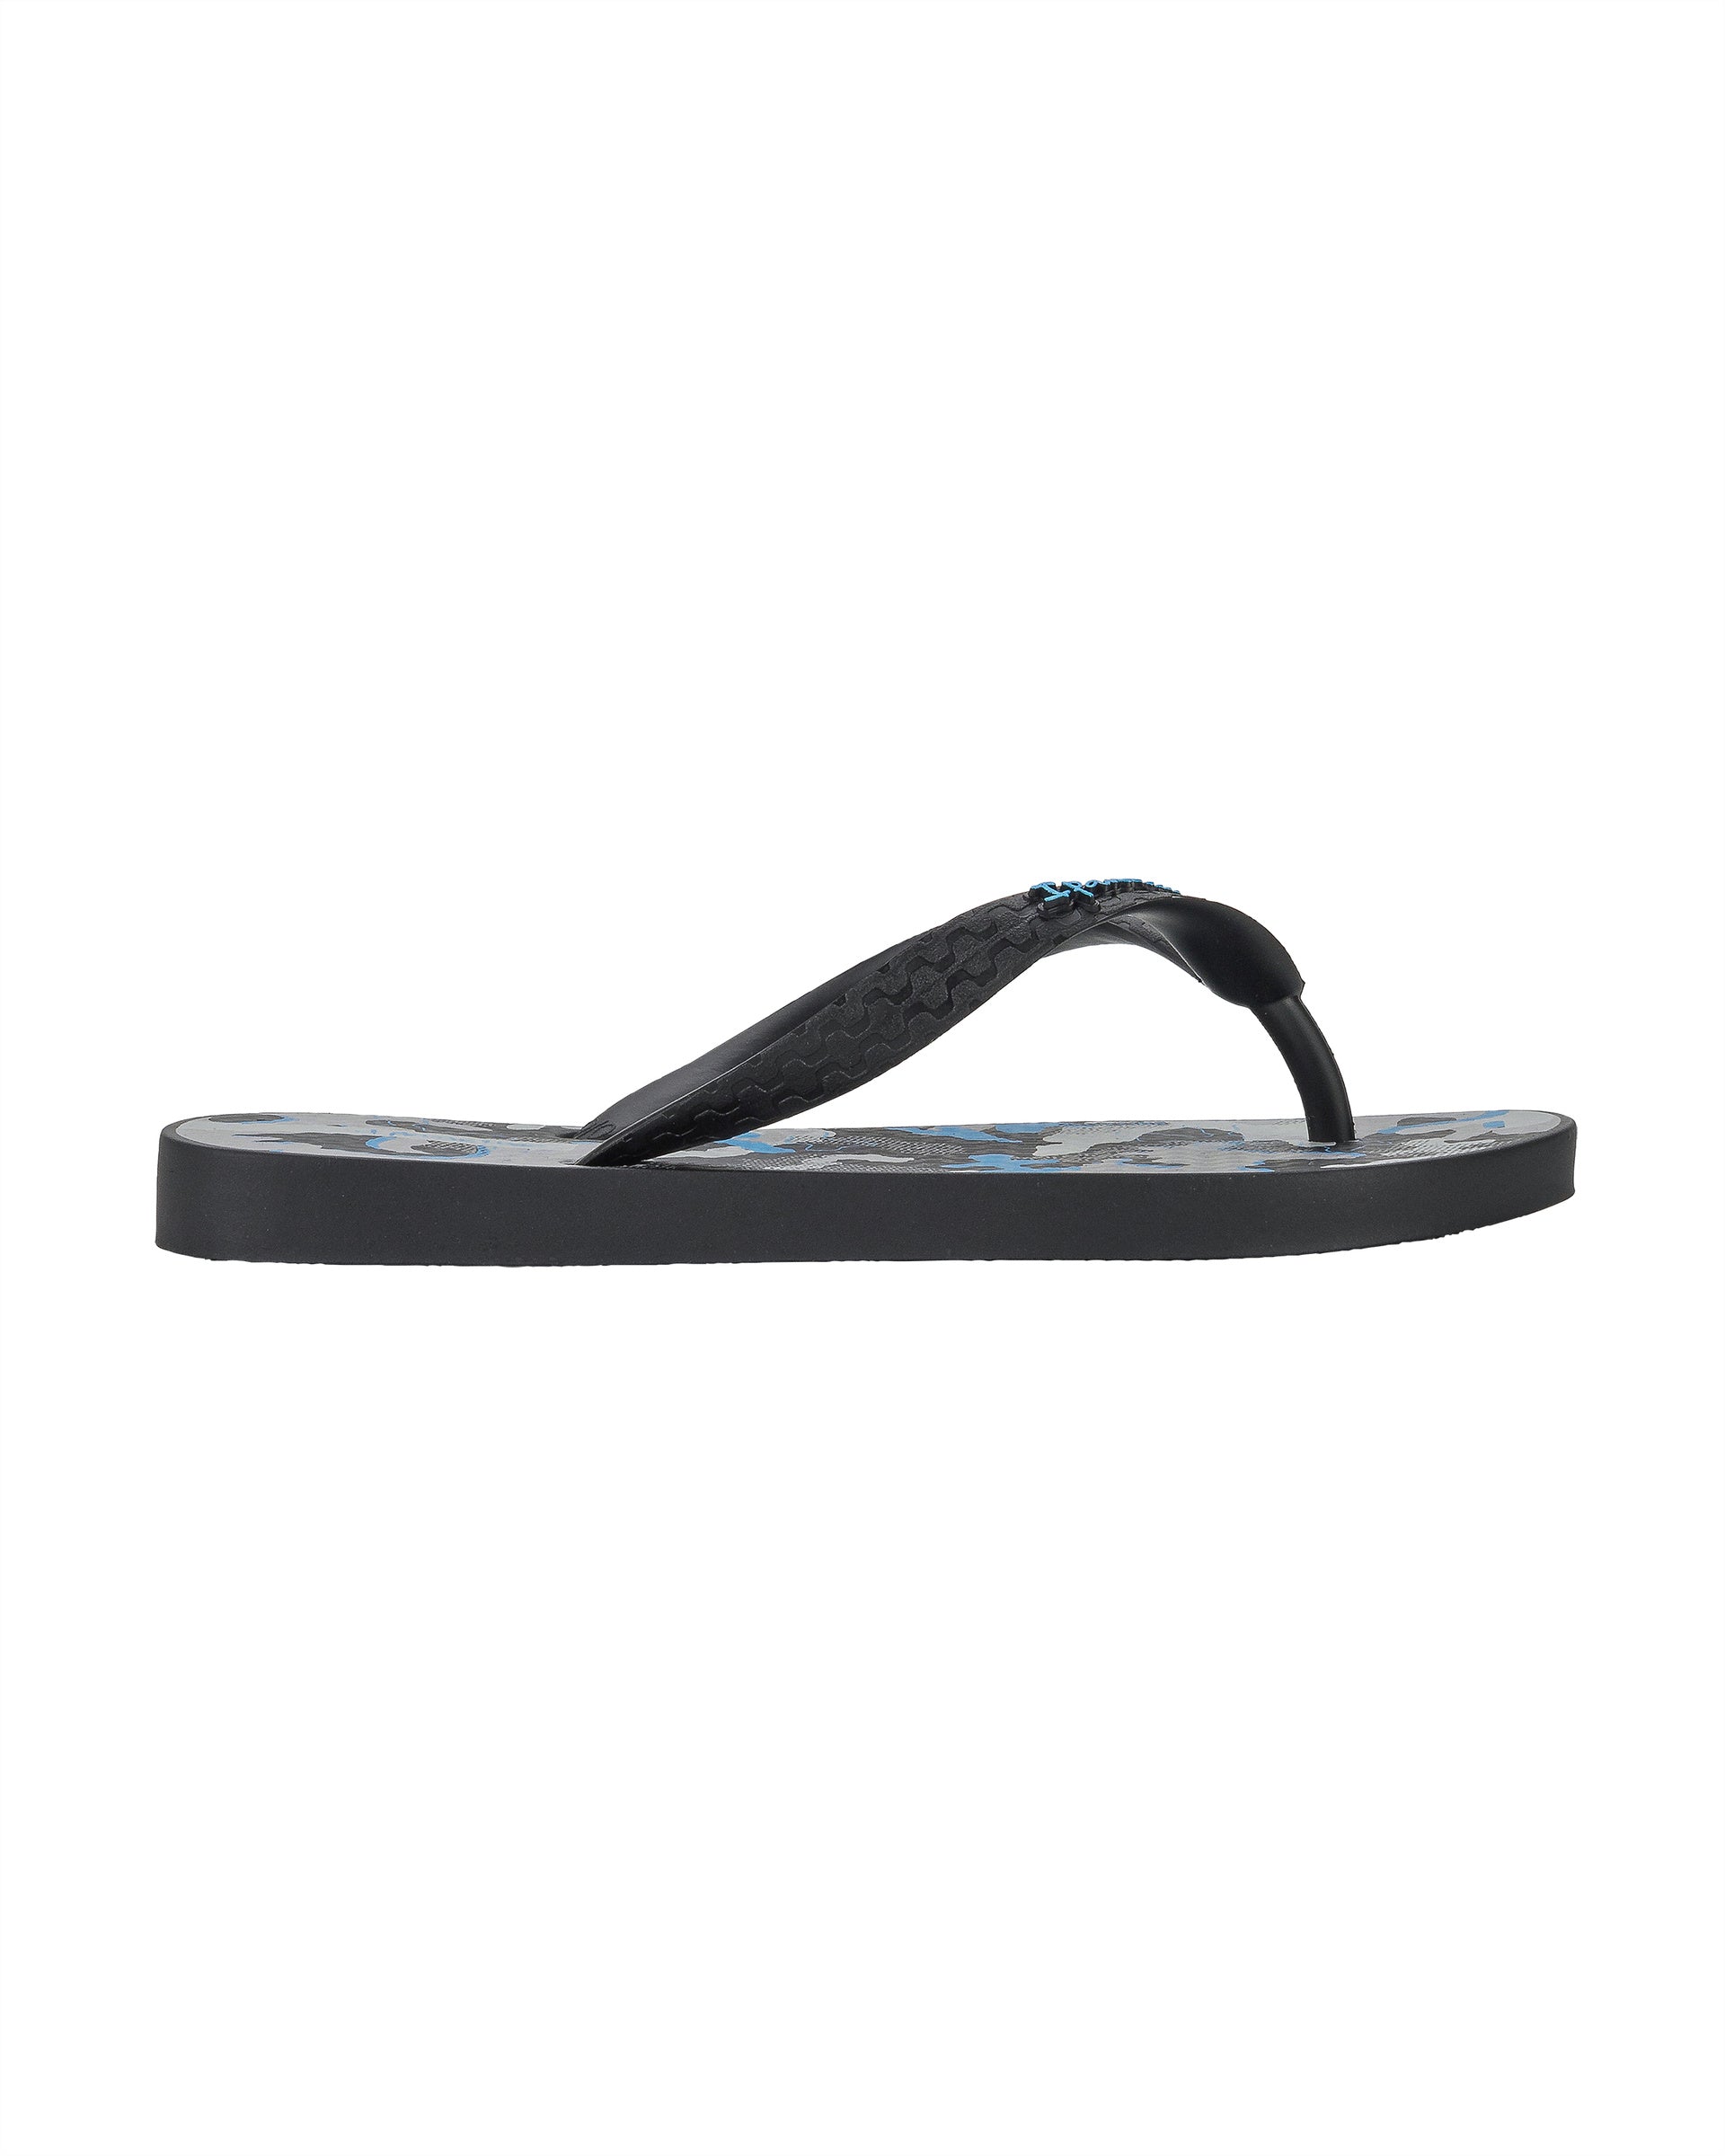 Outer side view of a black Ipanema Temas kids flip flop with camo print.